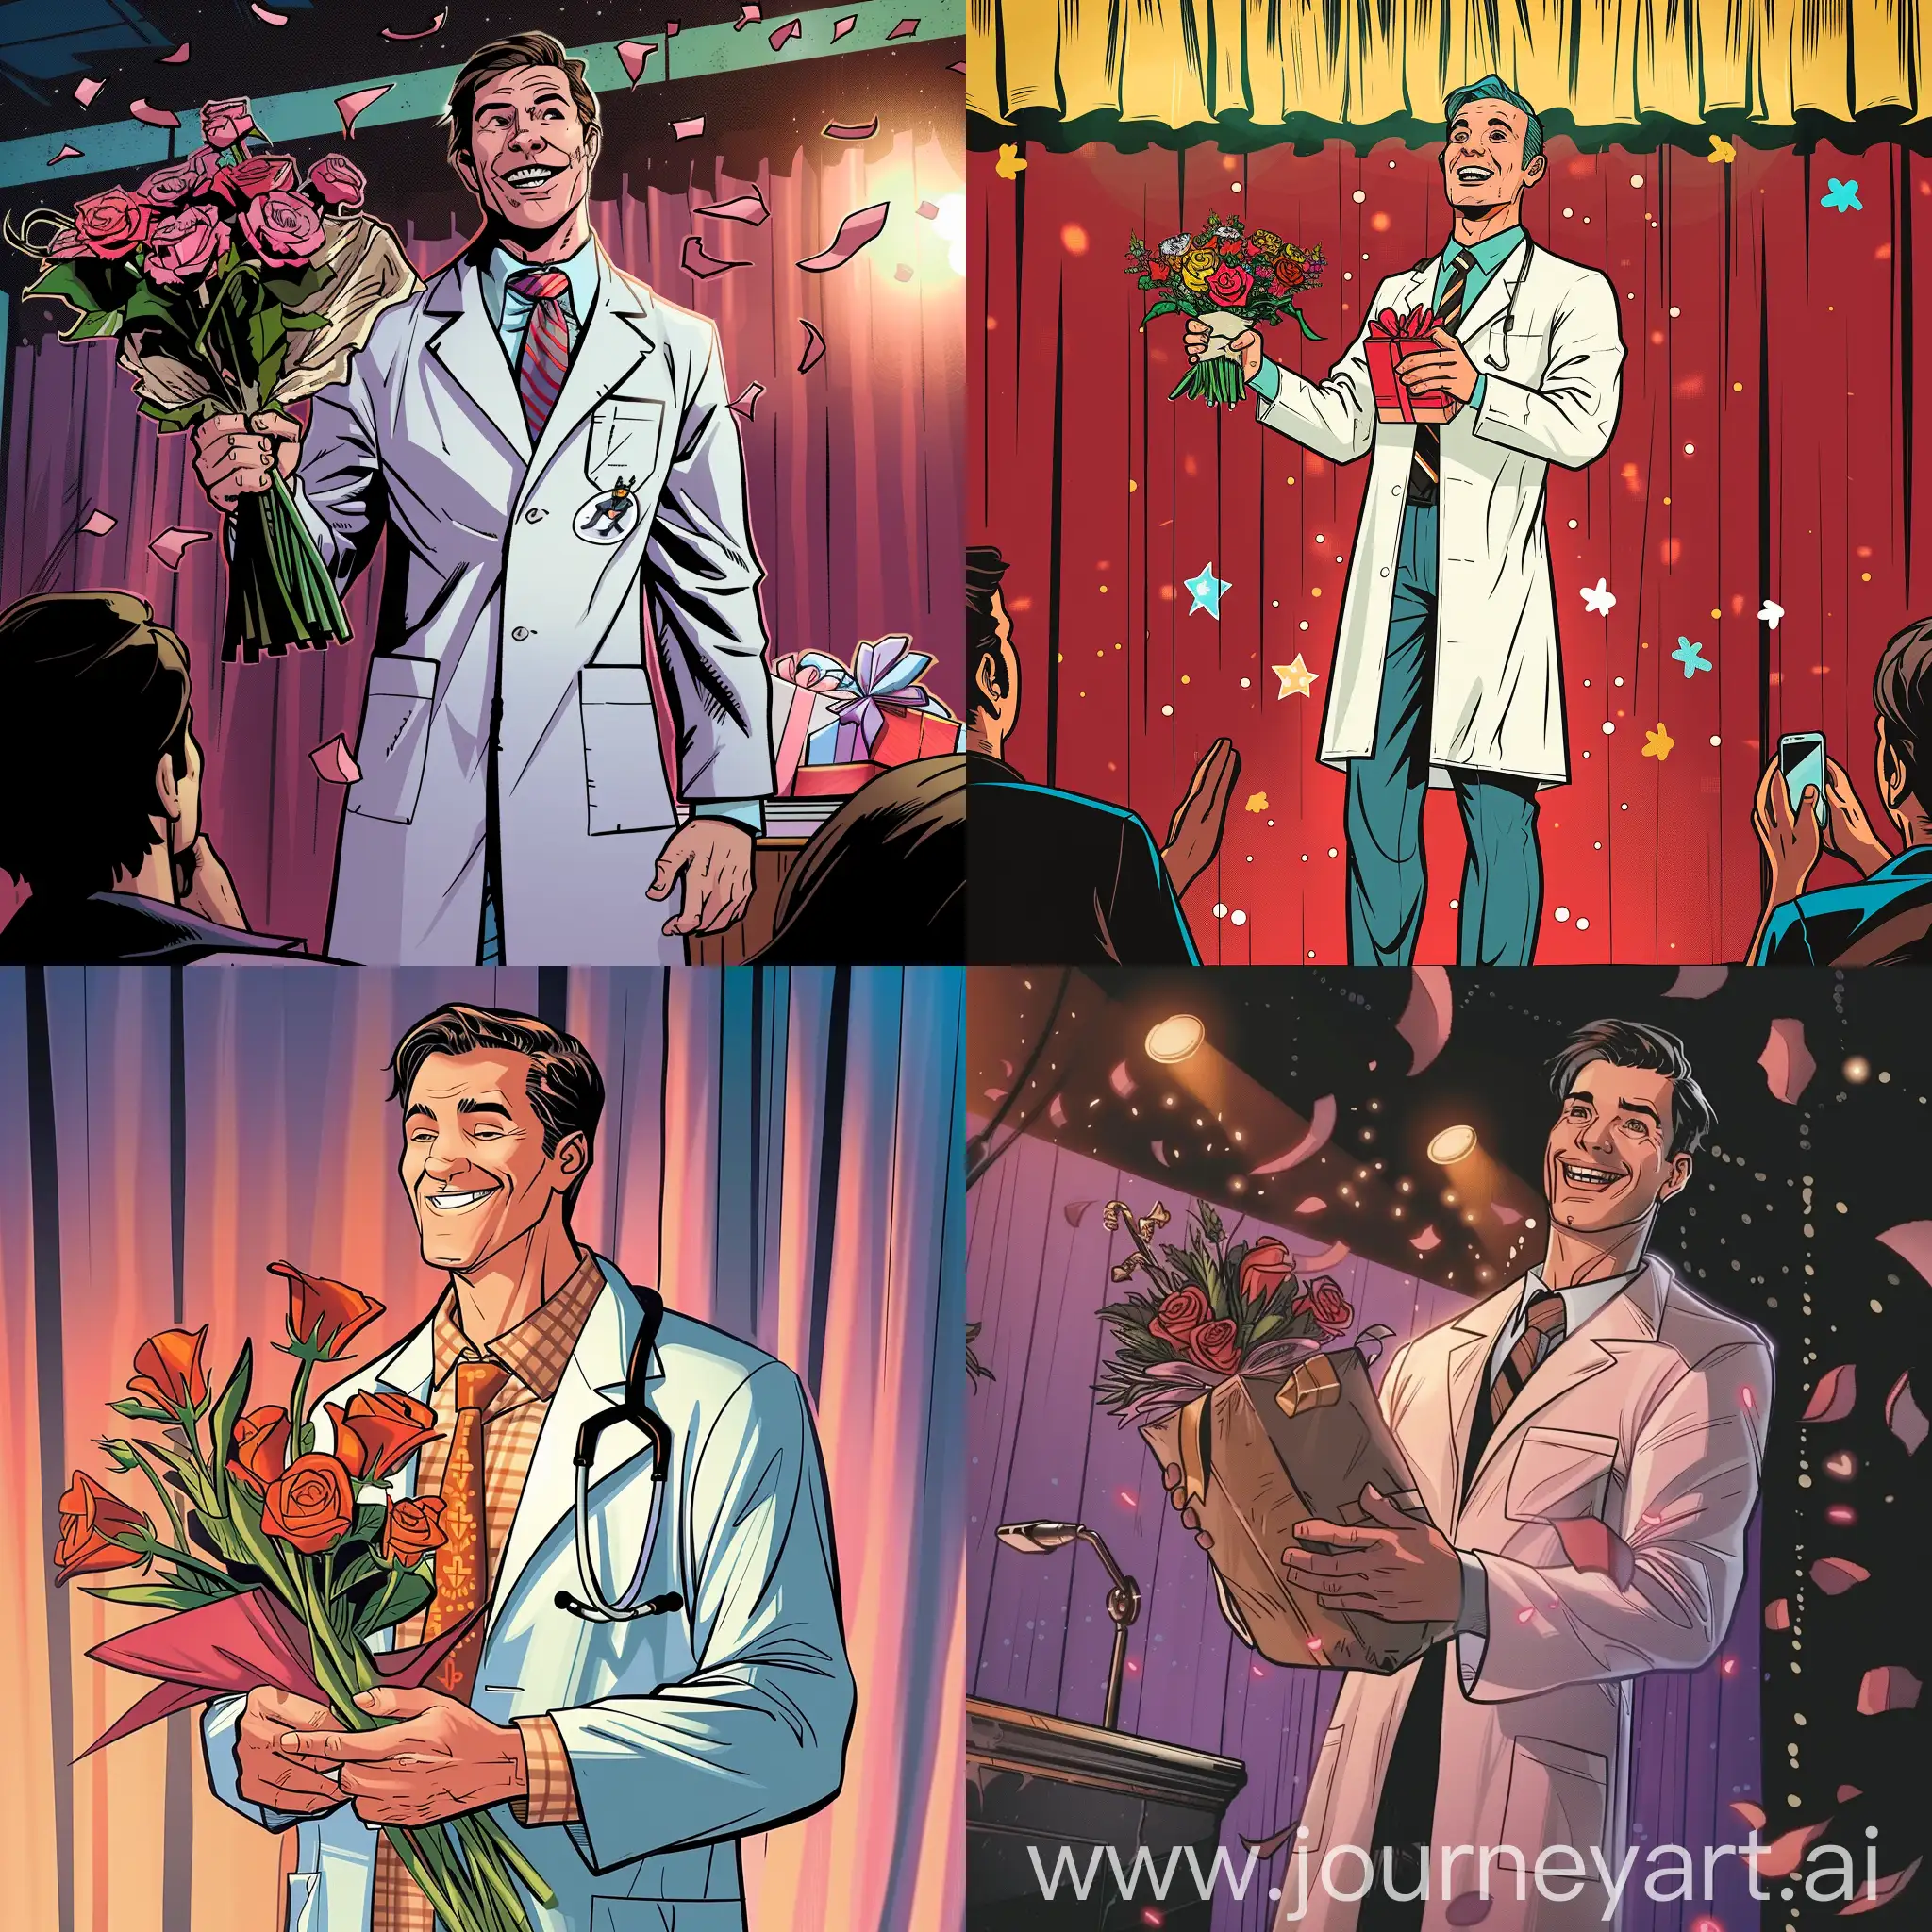 Celebrating-Doctor-Receives-Applause-and-Gifts-on-Stage-in-Comic-Format